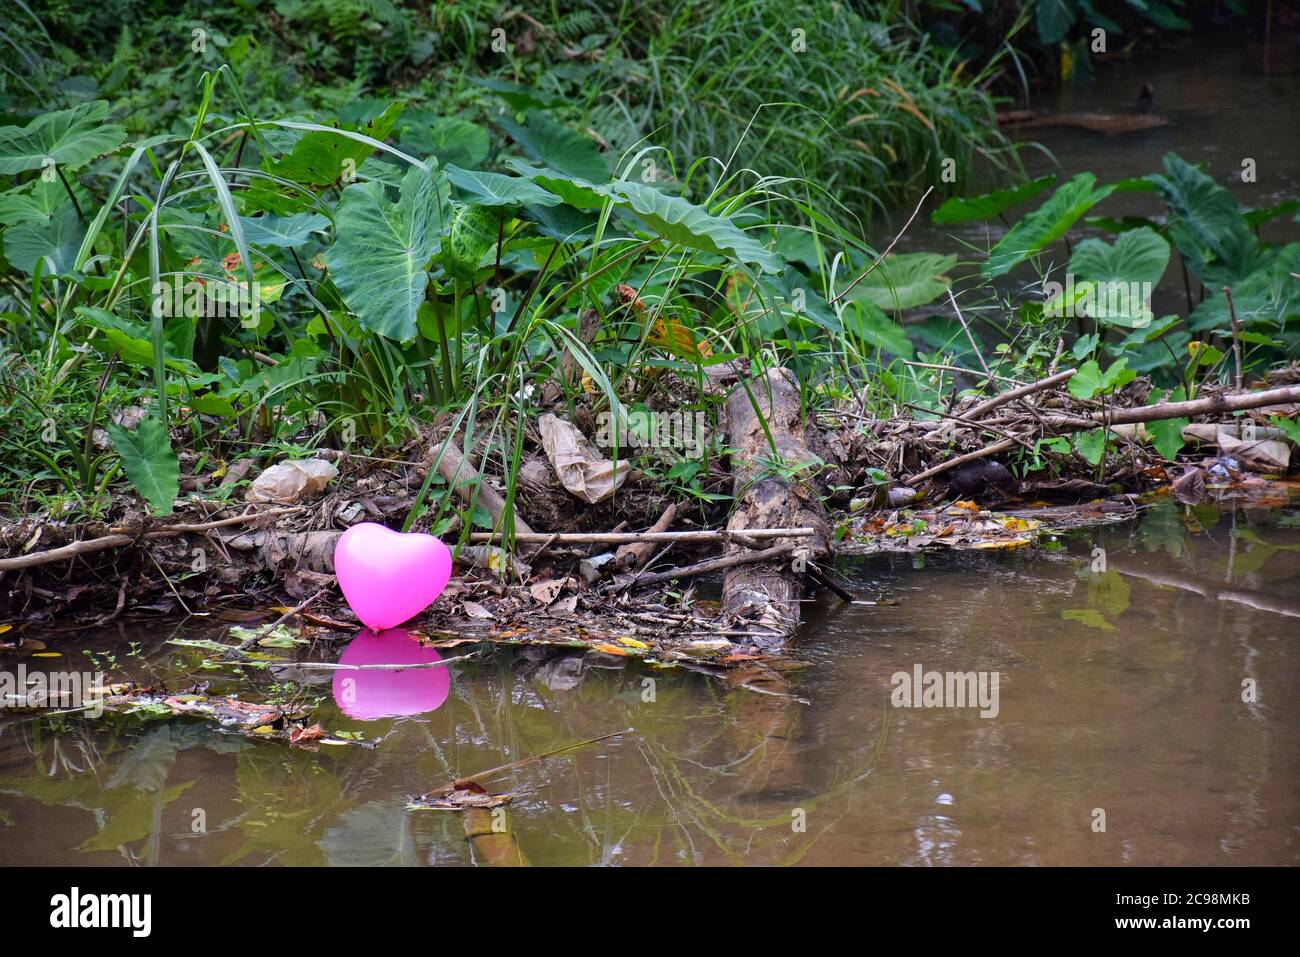 Heart balloons floating on the river polluting the environment. Stock Photo